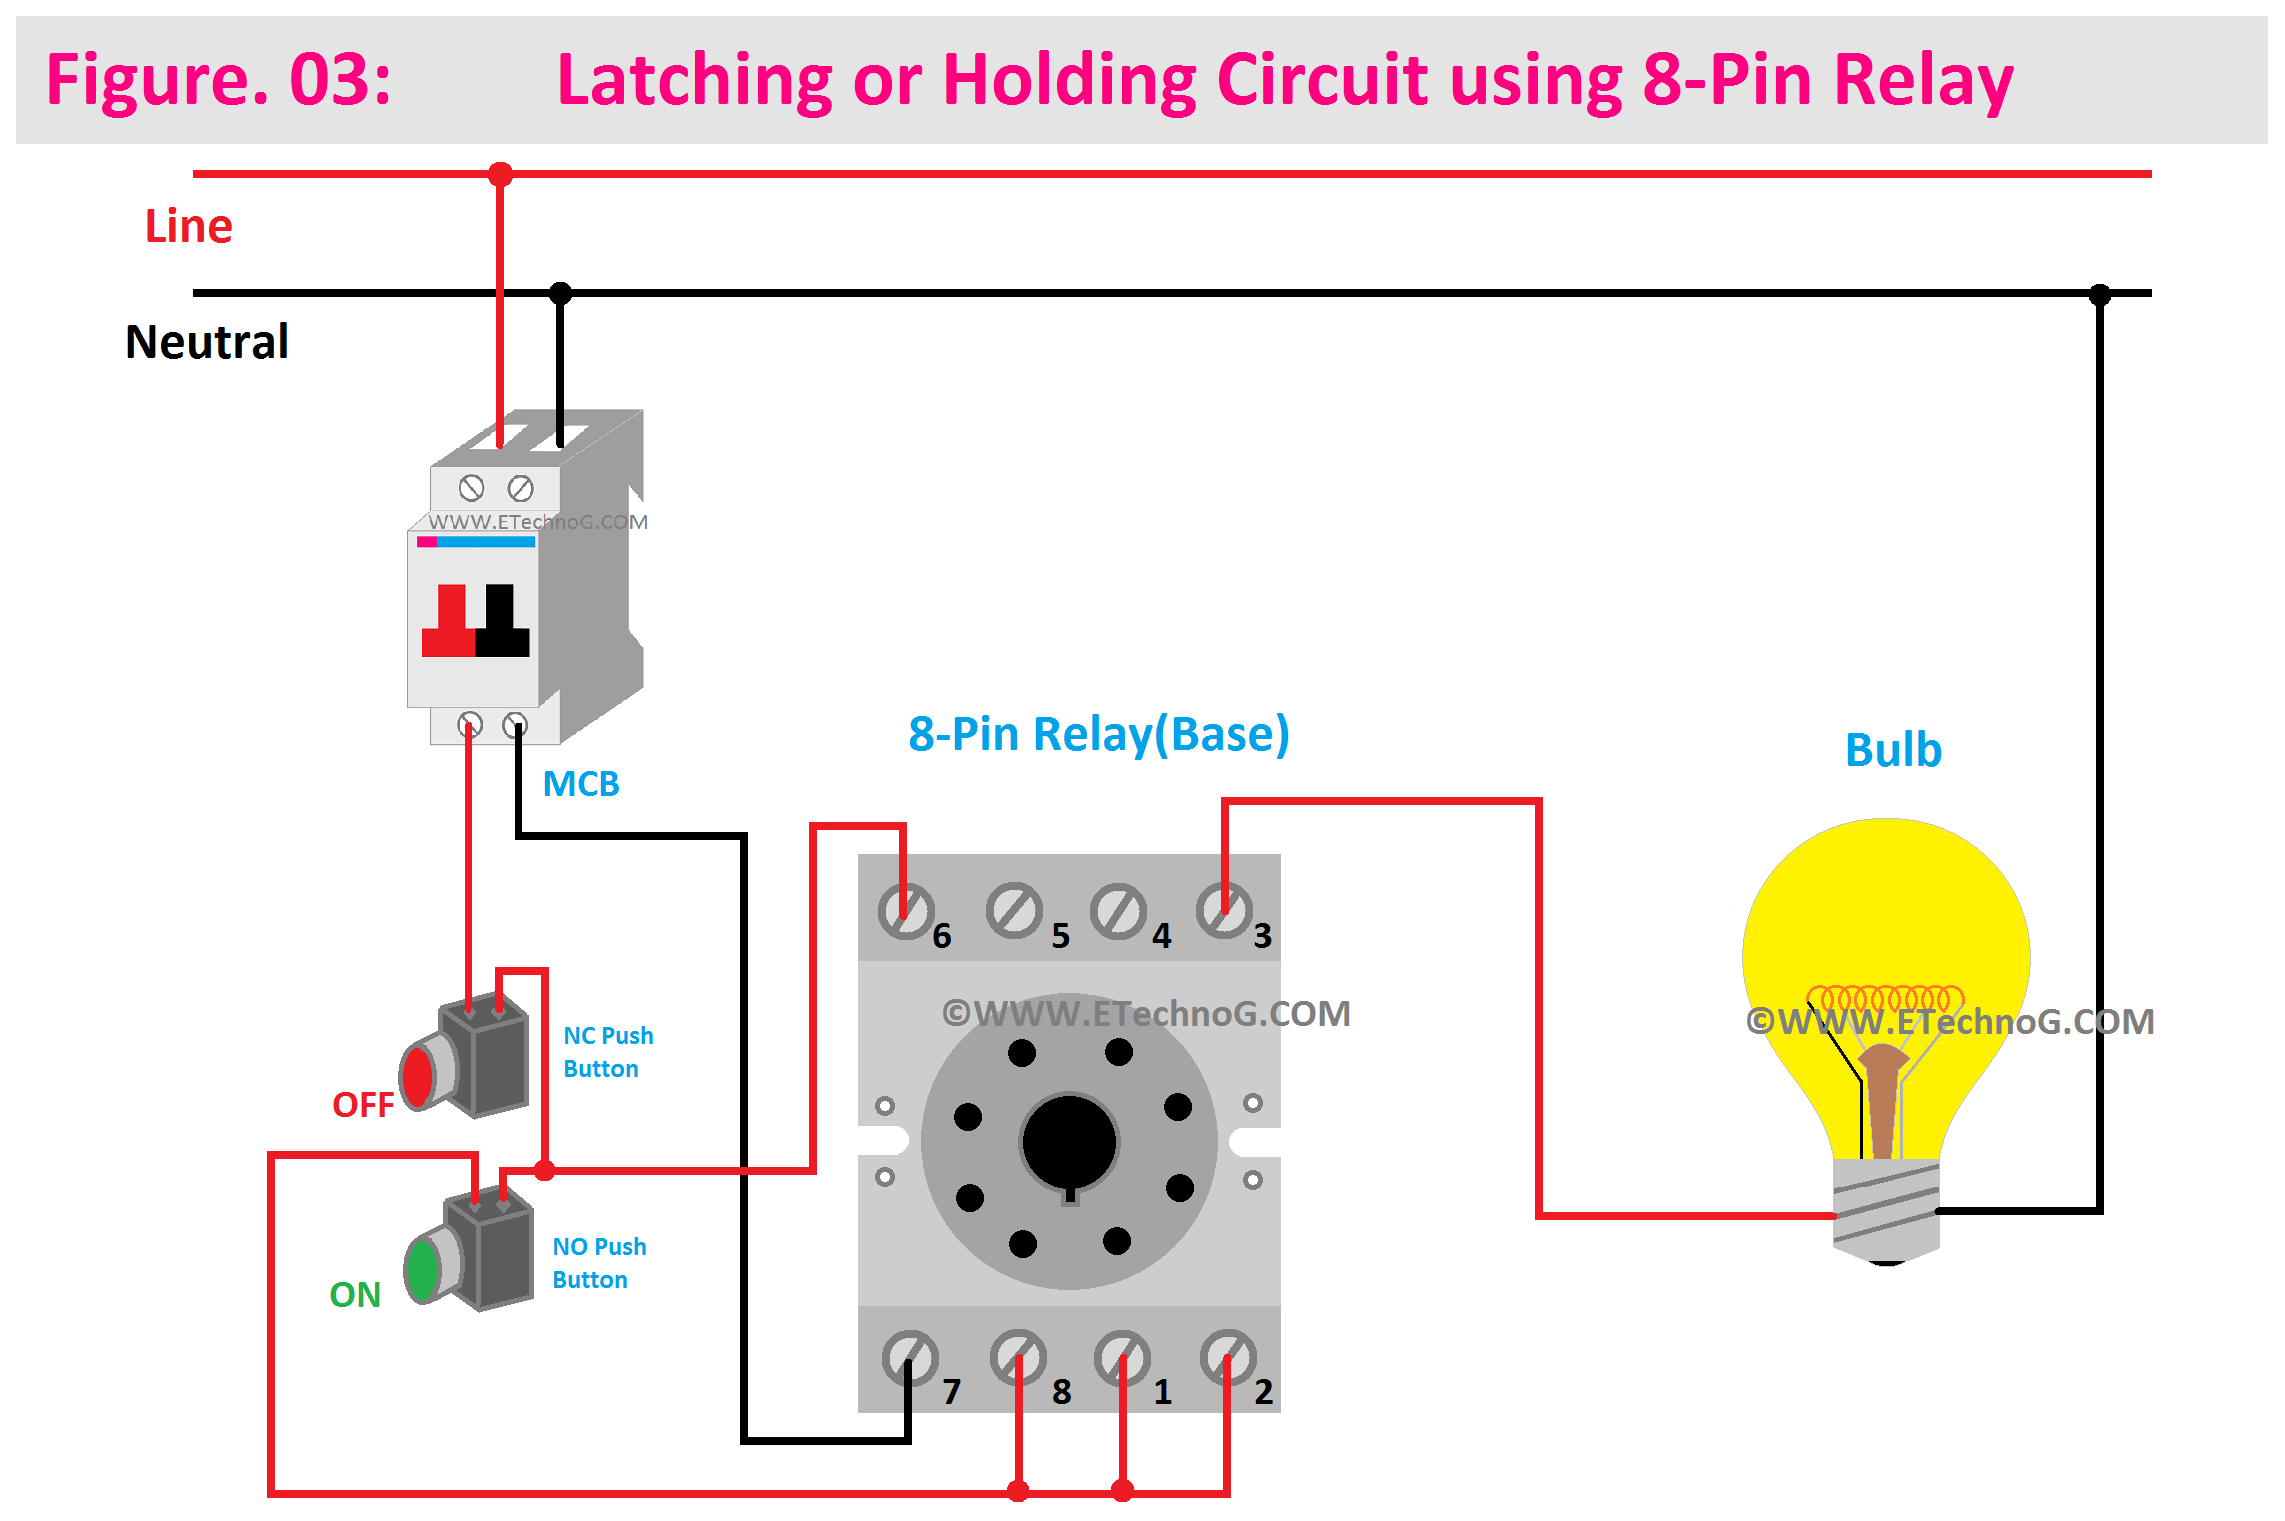 Latching or Holding Circuit using 8-Pin Relay